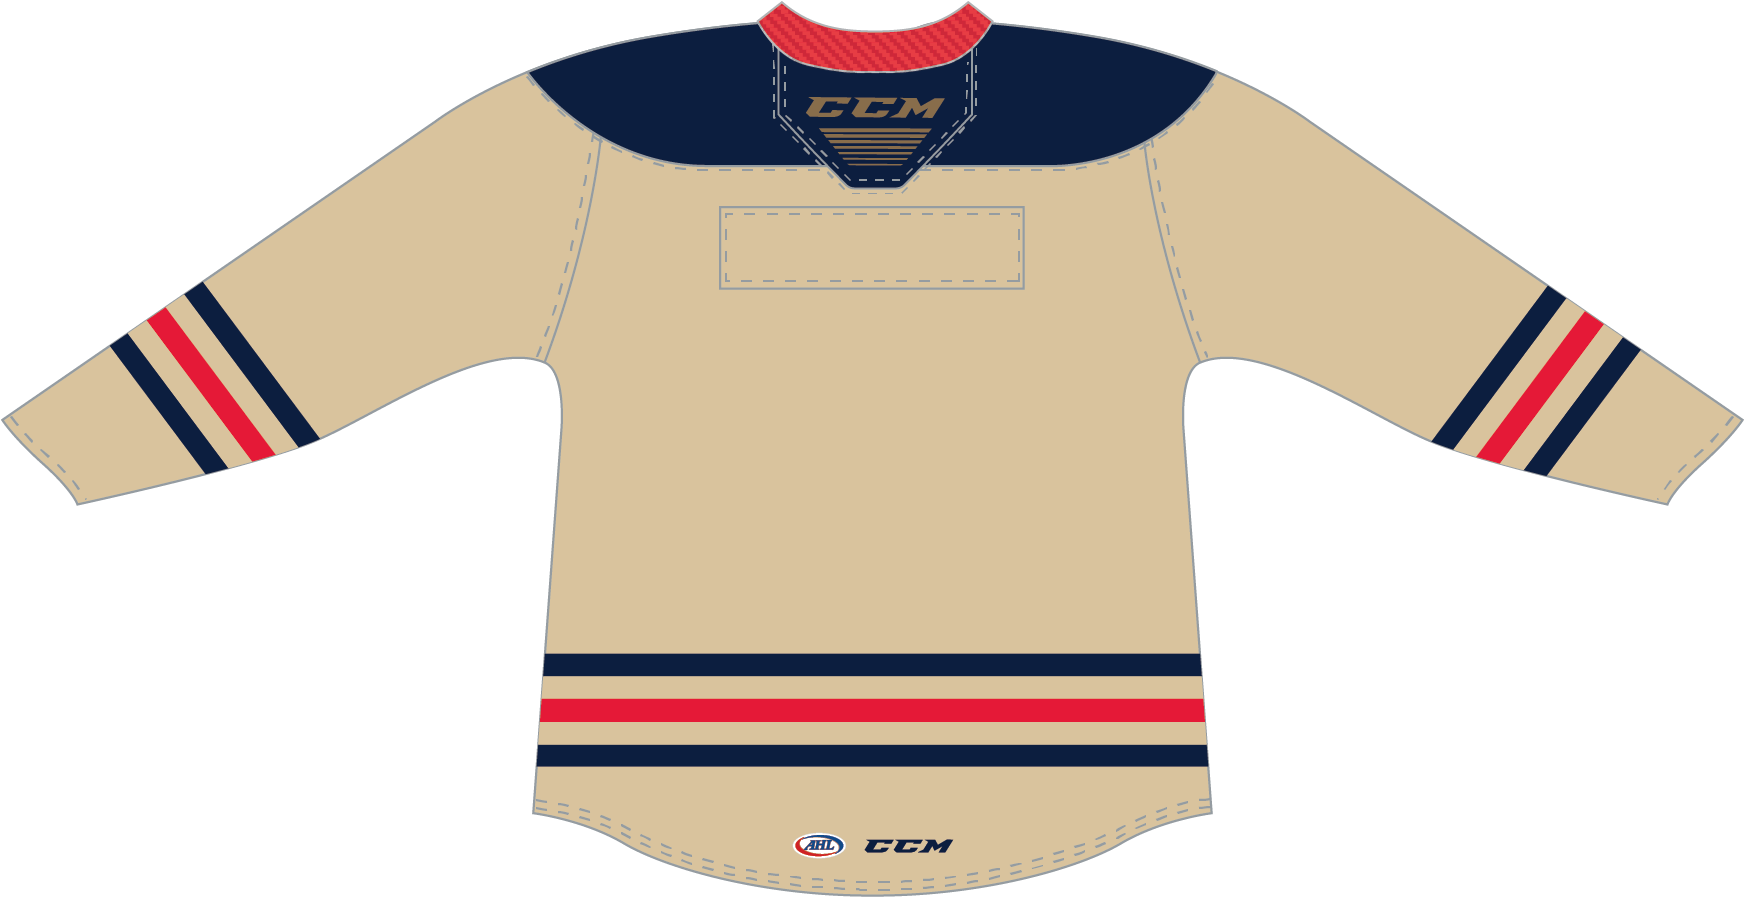 NHL in Milwaukee on X: Checkout this Milwaukee Hockey concept by